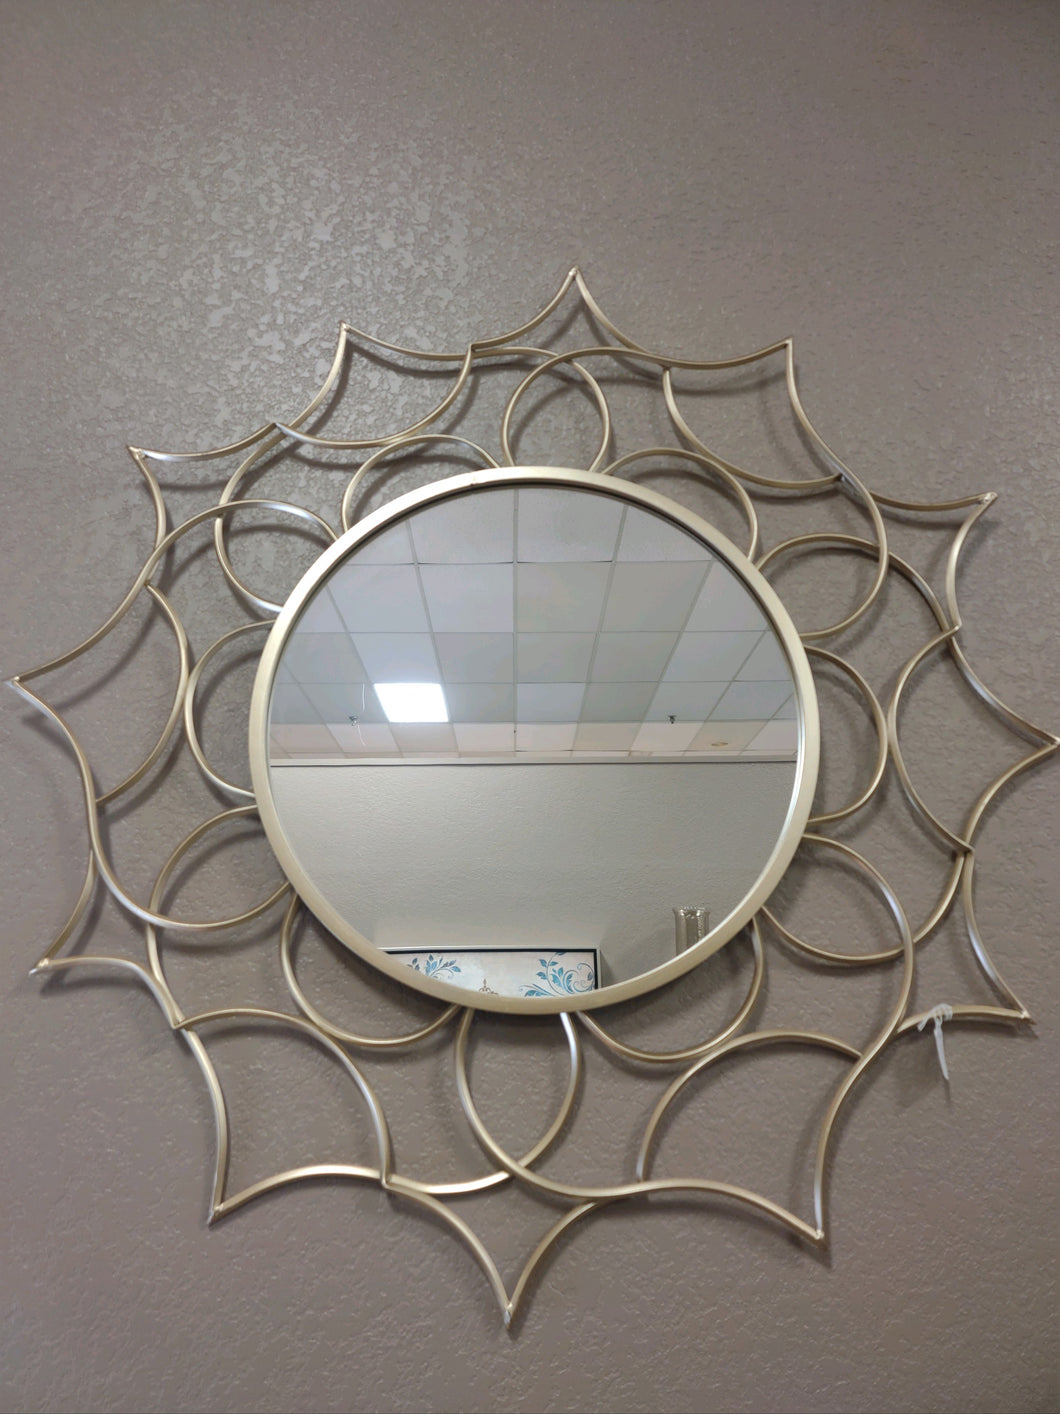 Gold Sun Mirror $79.95 - 1 Only!